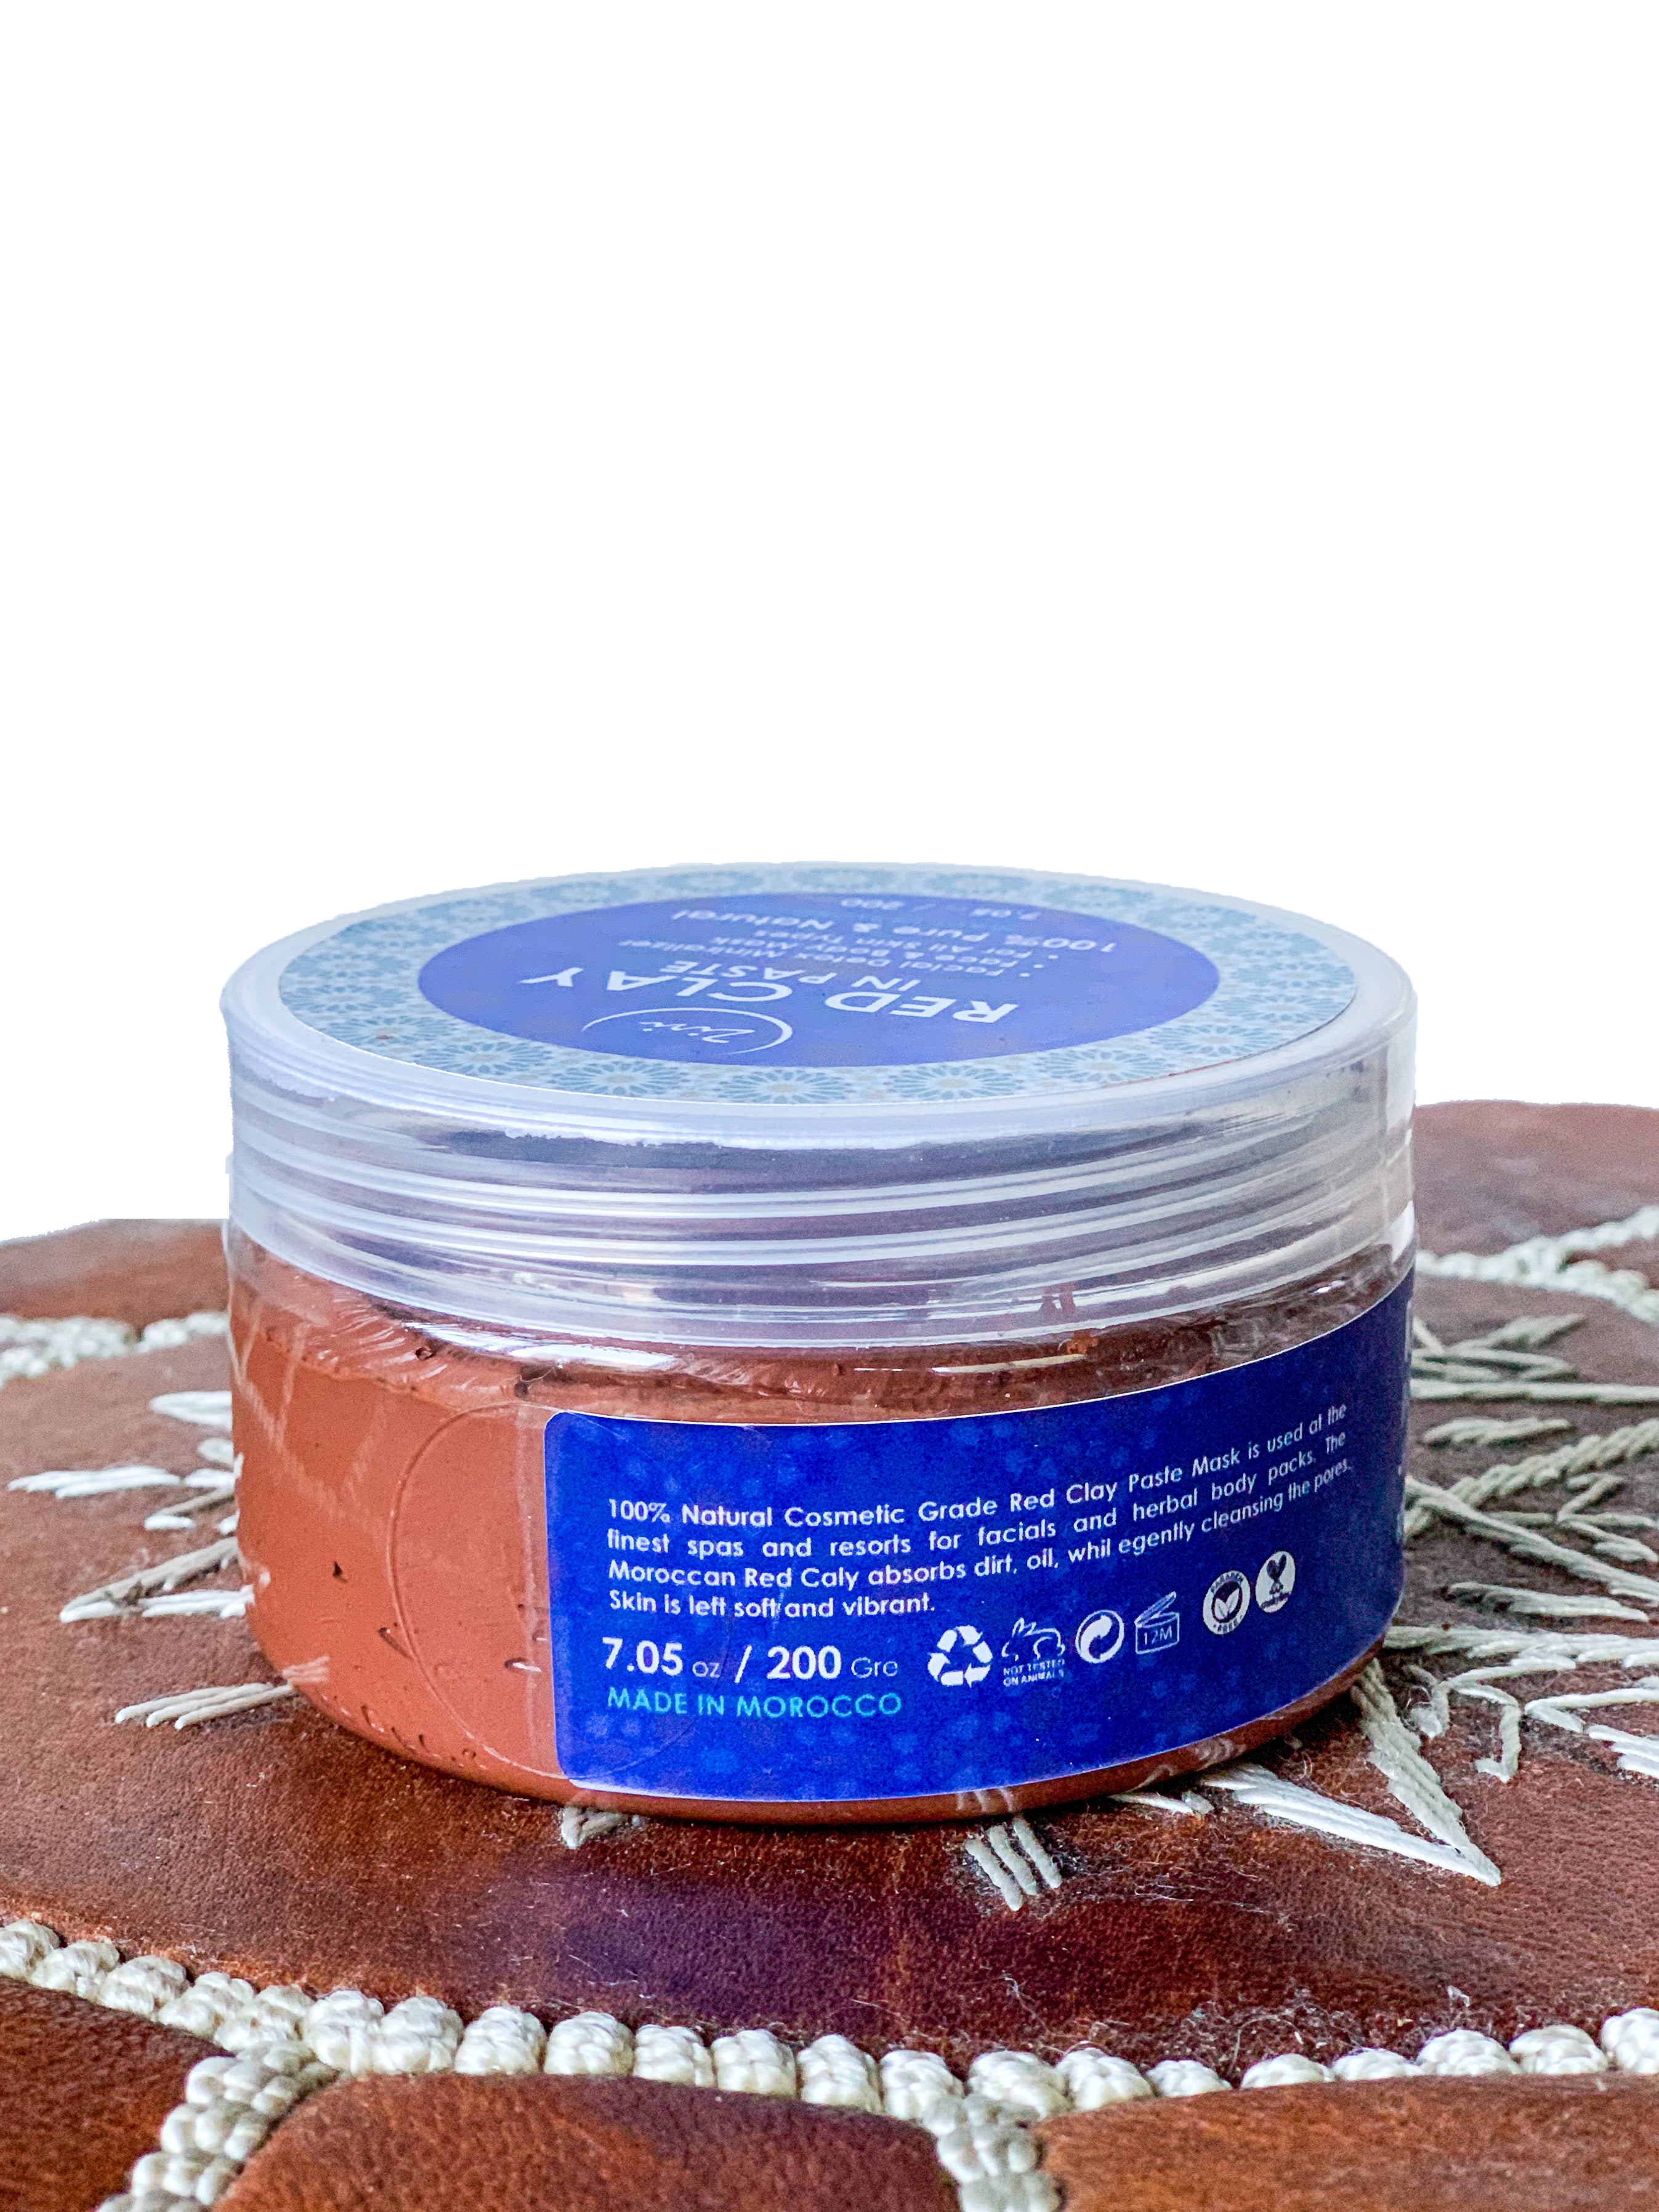 Moroccan Red Clay - Natural Moroccan Skin and Hair Care